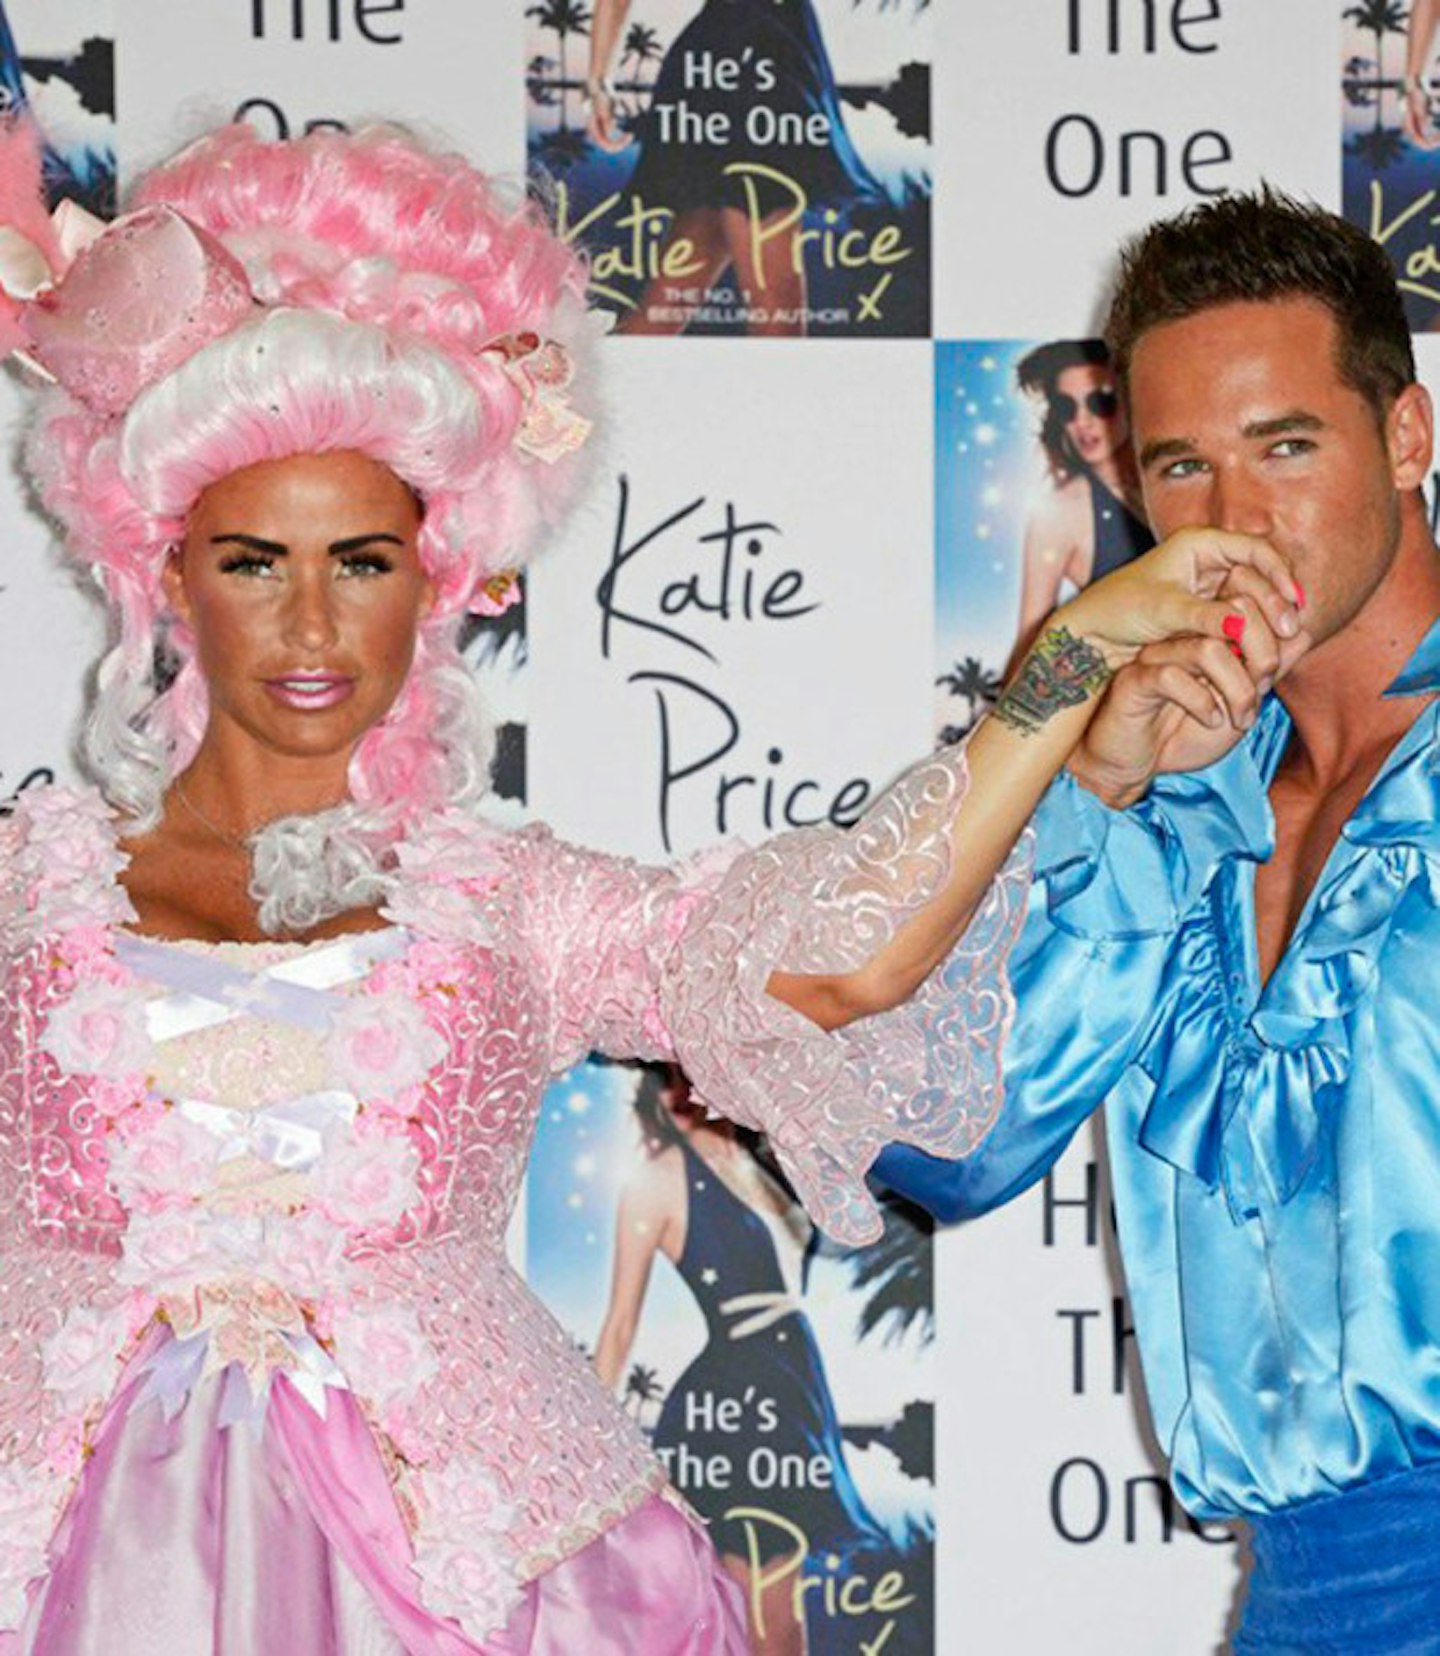 katie-price-tattoo-peter-andre